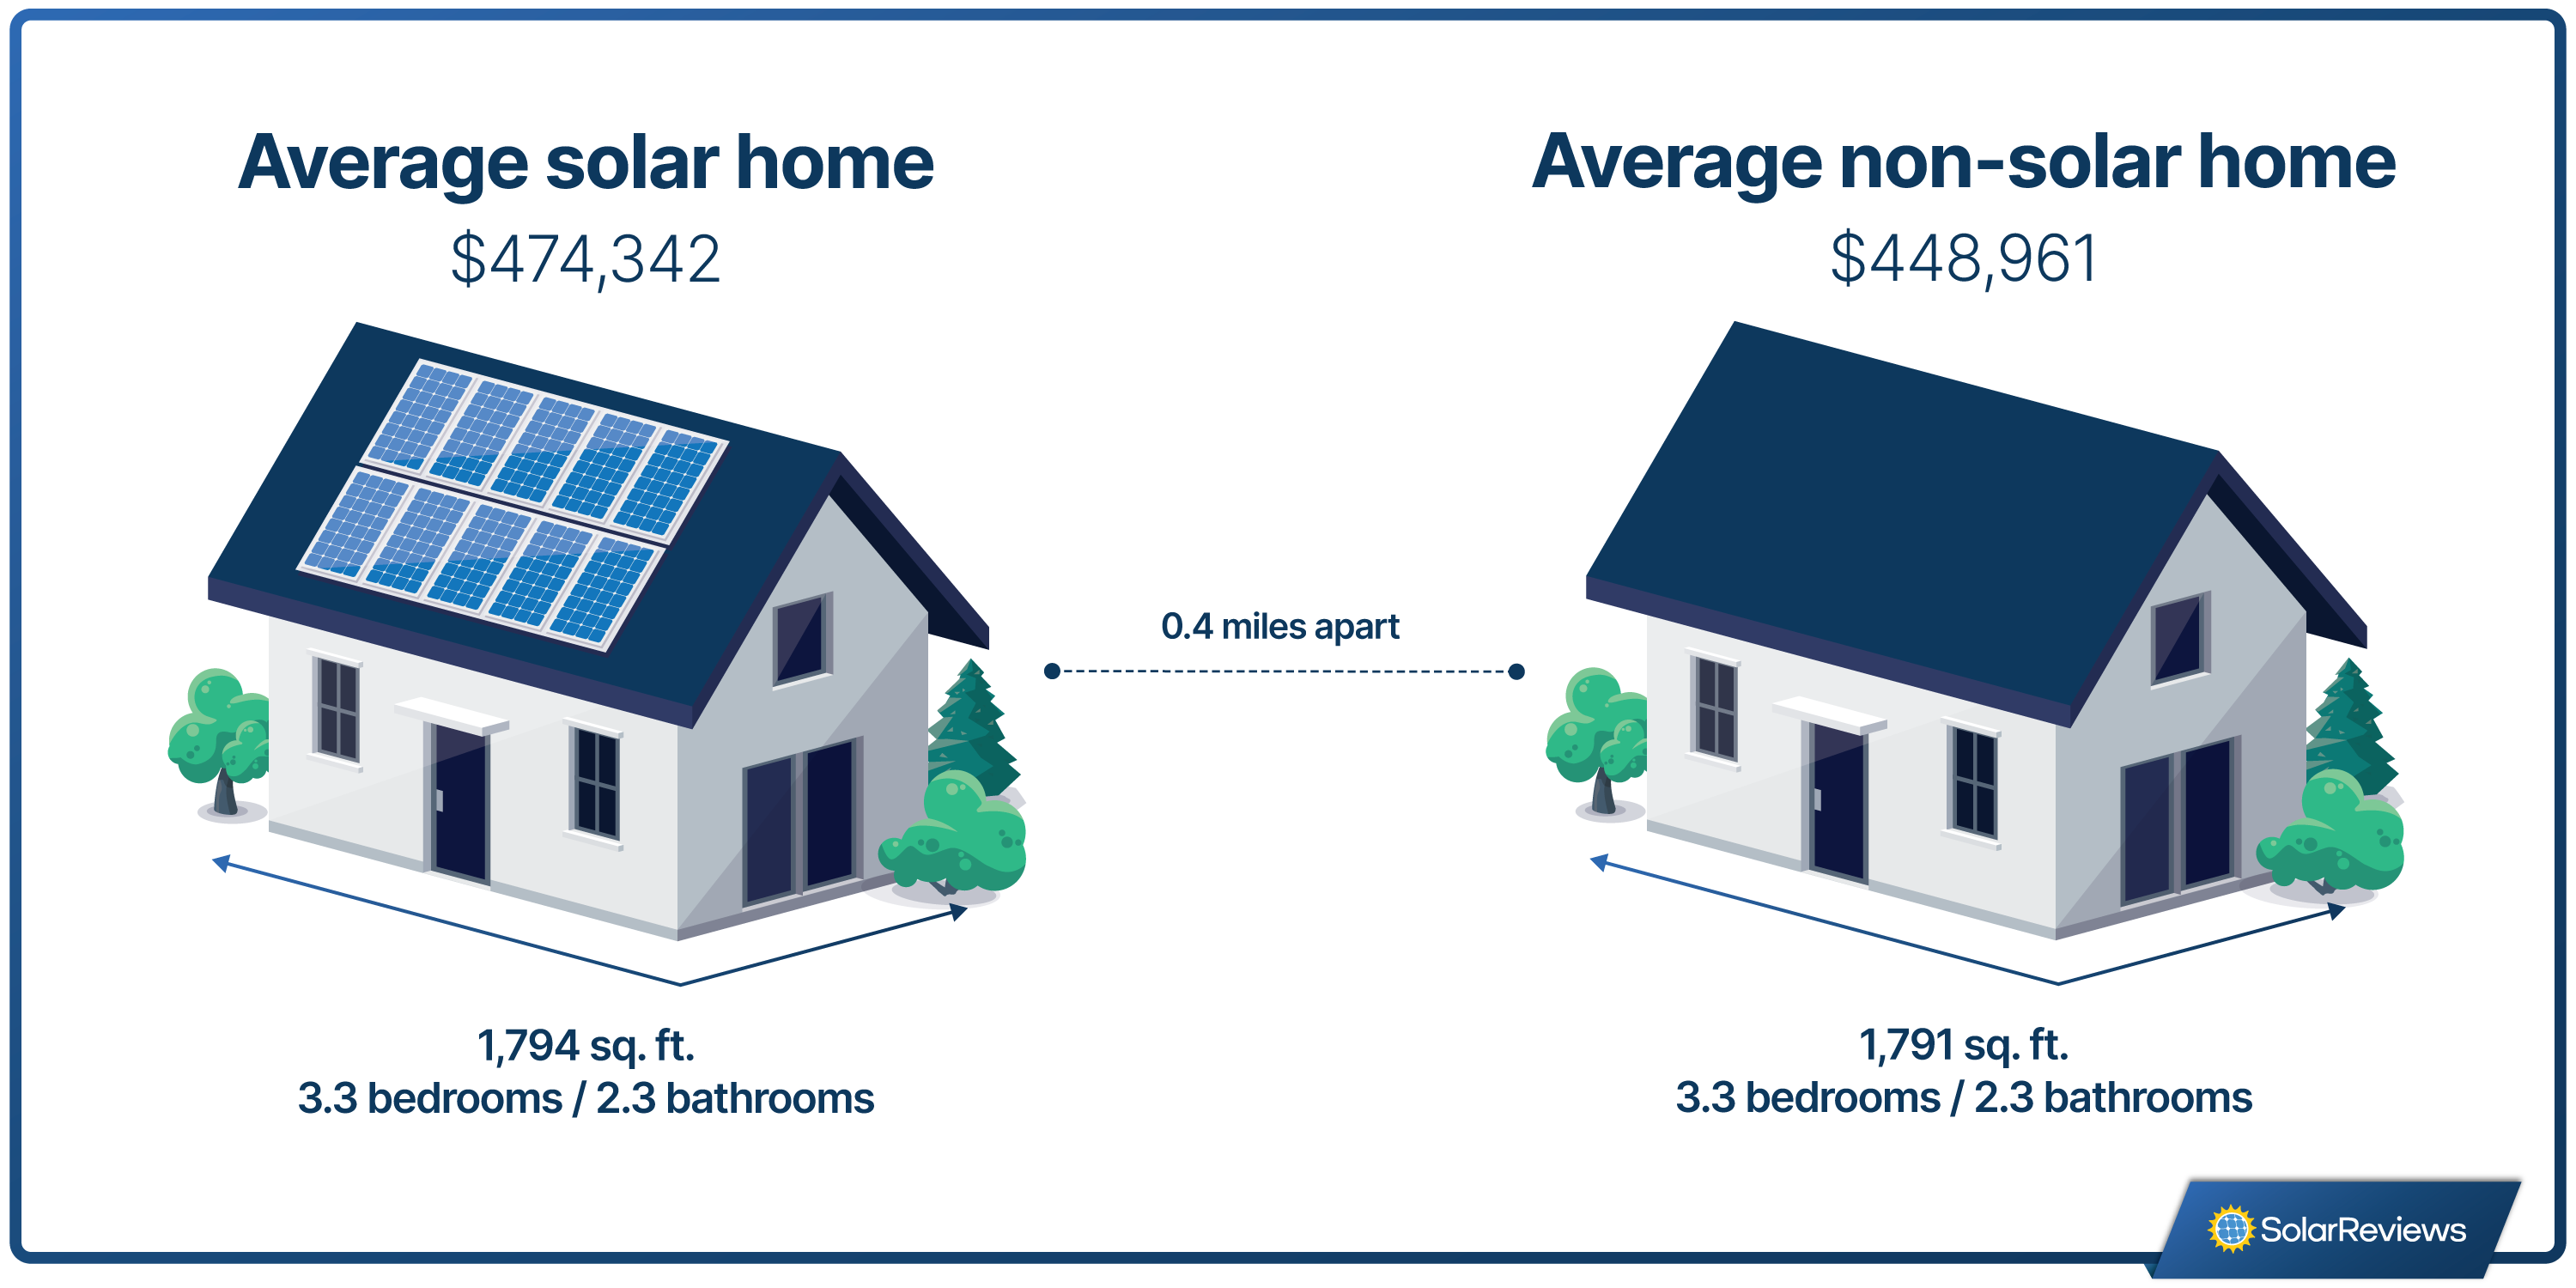 Graphic of two homes side by side, one with solar, and one without, describing the average homes studied. The average home with solar was priced at $474,342, with 1,794 square feet, 3.3 bedrooms, and 2.3 bathrooms. The average non-solar home was priced at $448,961, with 1,791 square feet, 3.3 bedrooms, and 2.3 bathrooms.